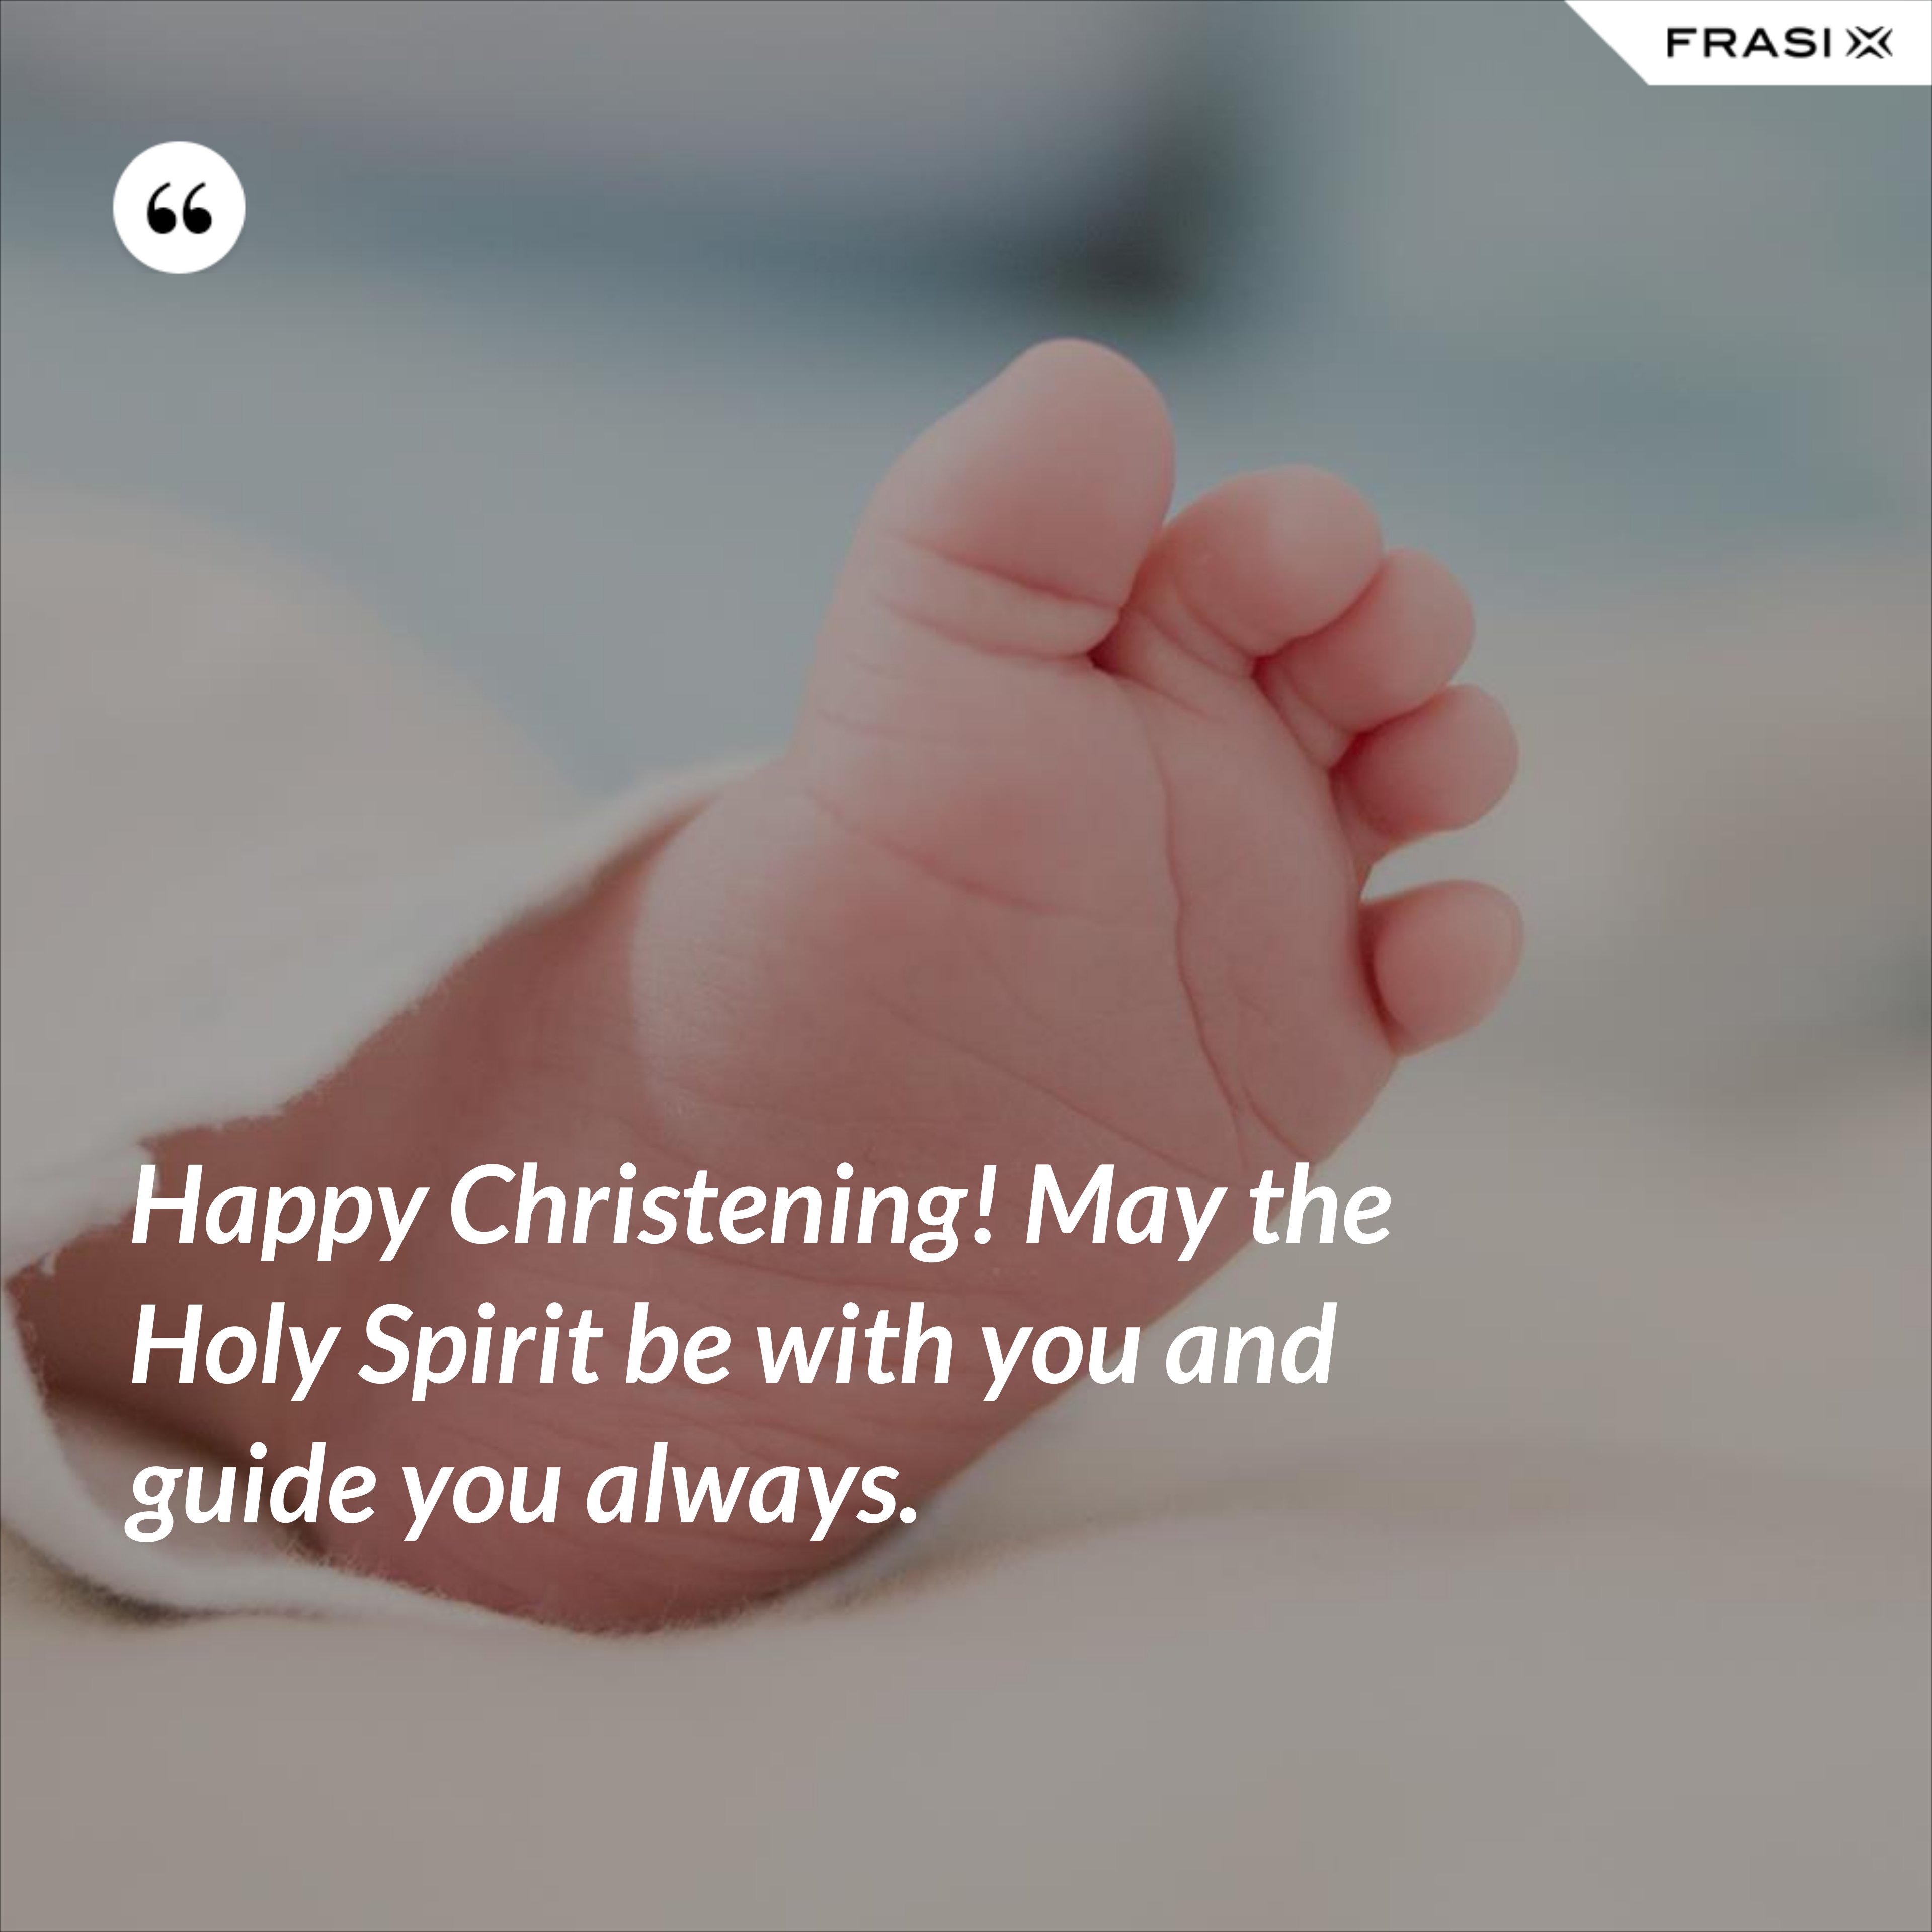 Happy Christening! May the Holy Spirit be with you and guide you always. - Anonimo